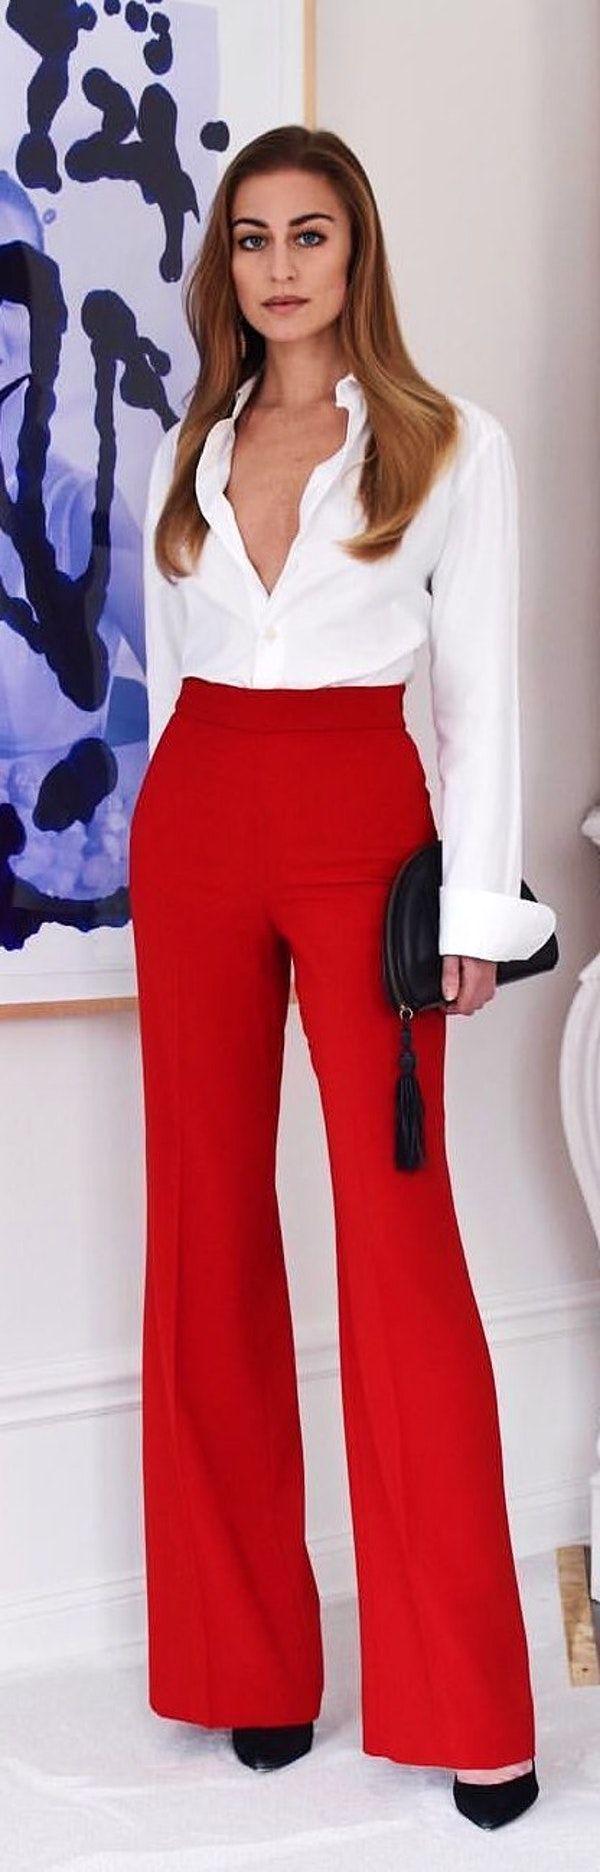 White Shirt In High Waist Red Pant Outfits For Women: shirts,  red trousers,  White Shirt  